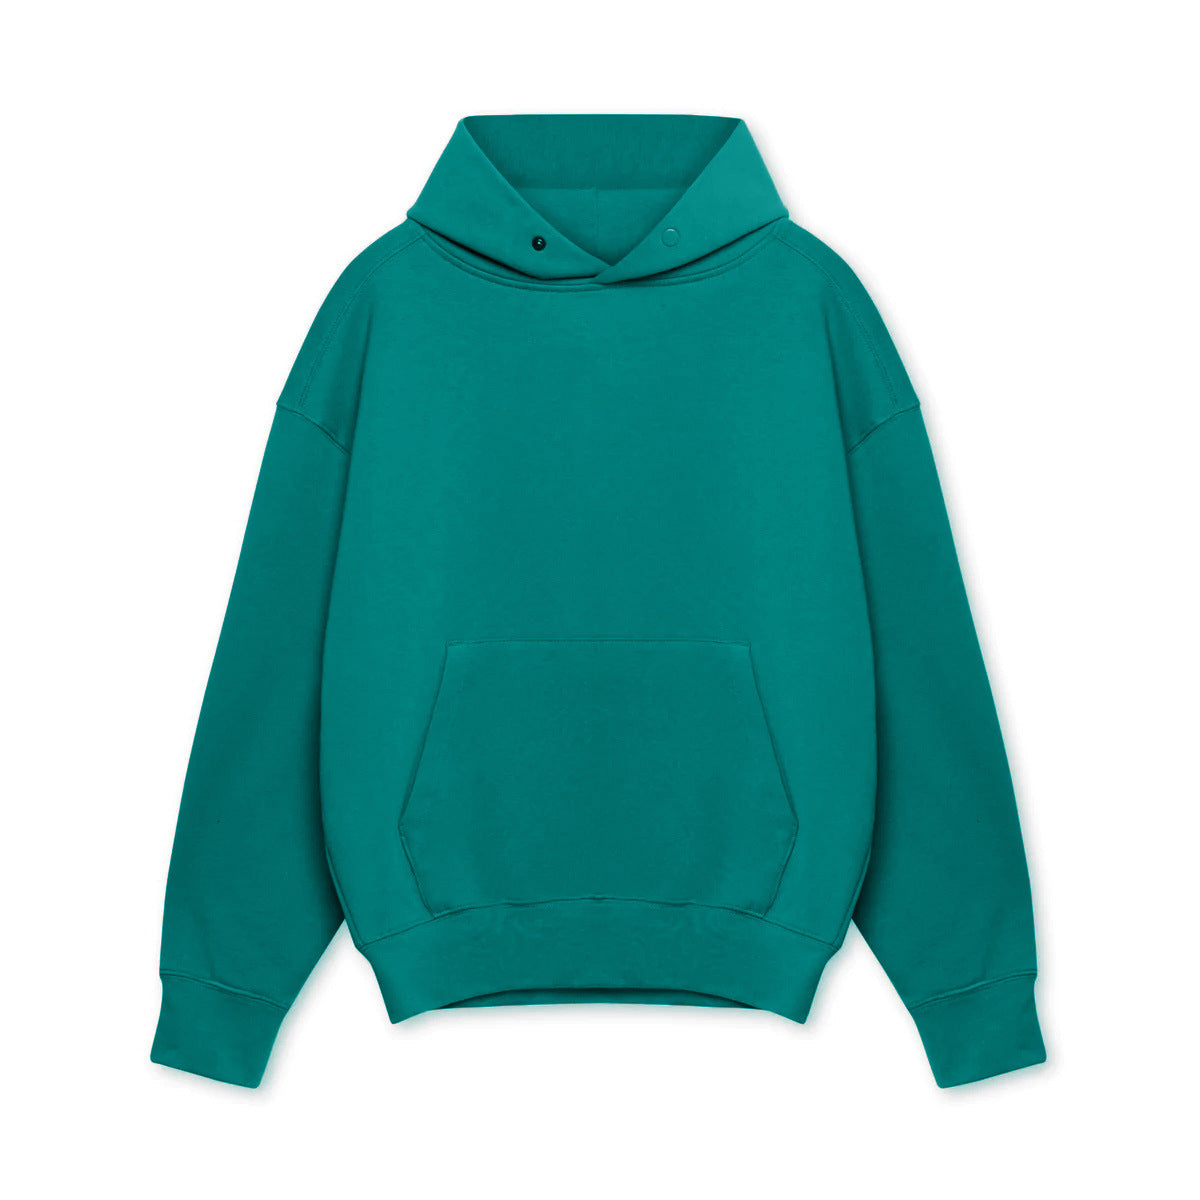 Classic American Cool: Elevate Your Look with Iconic Style Hoodies